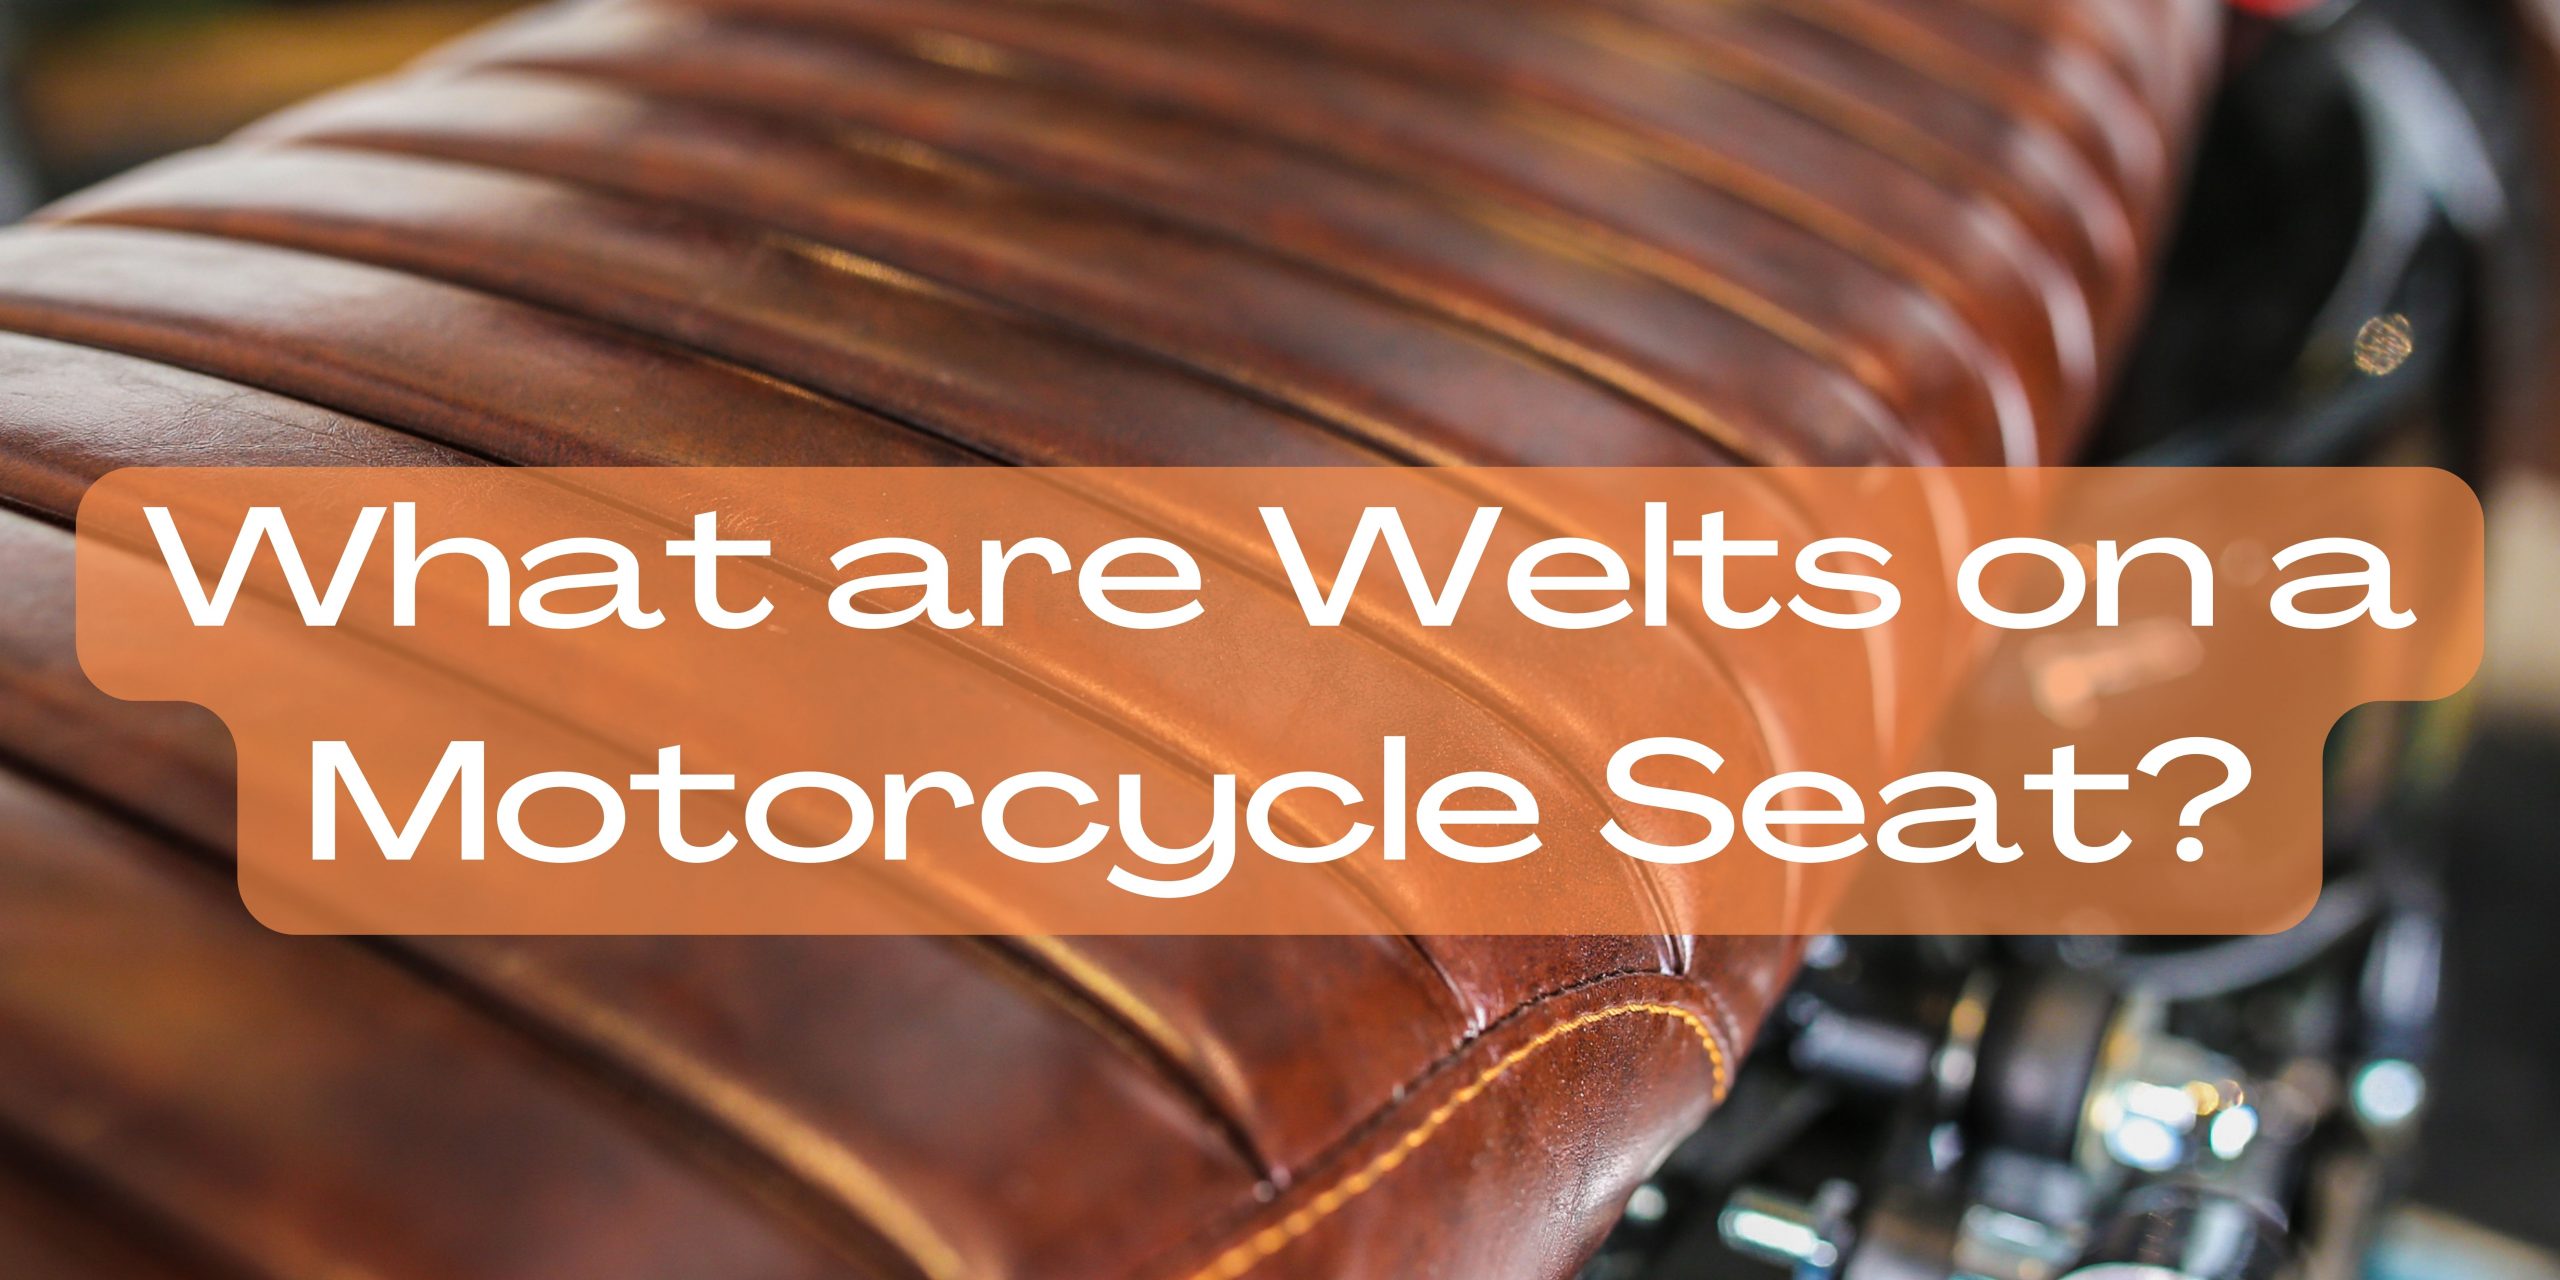 You are currently viewing What are Welts on a Motorcycle Seat?